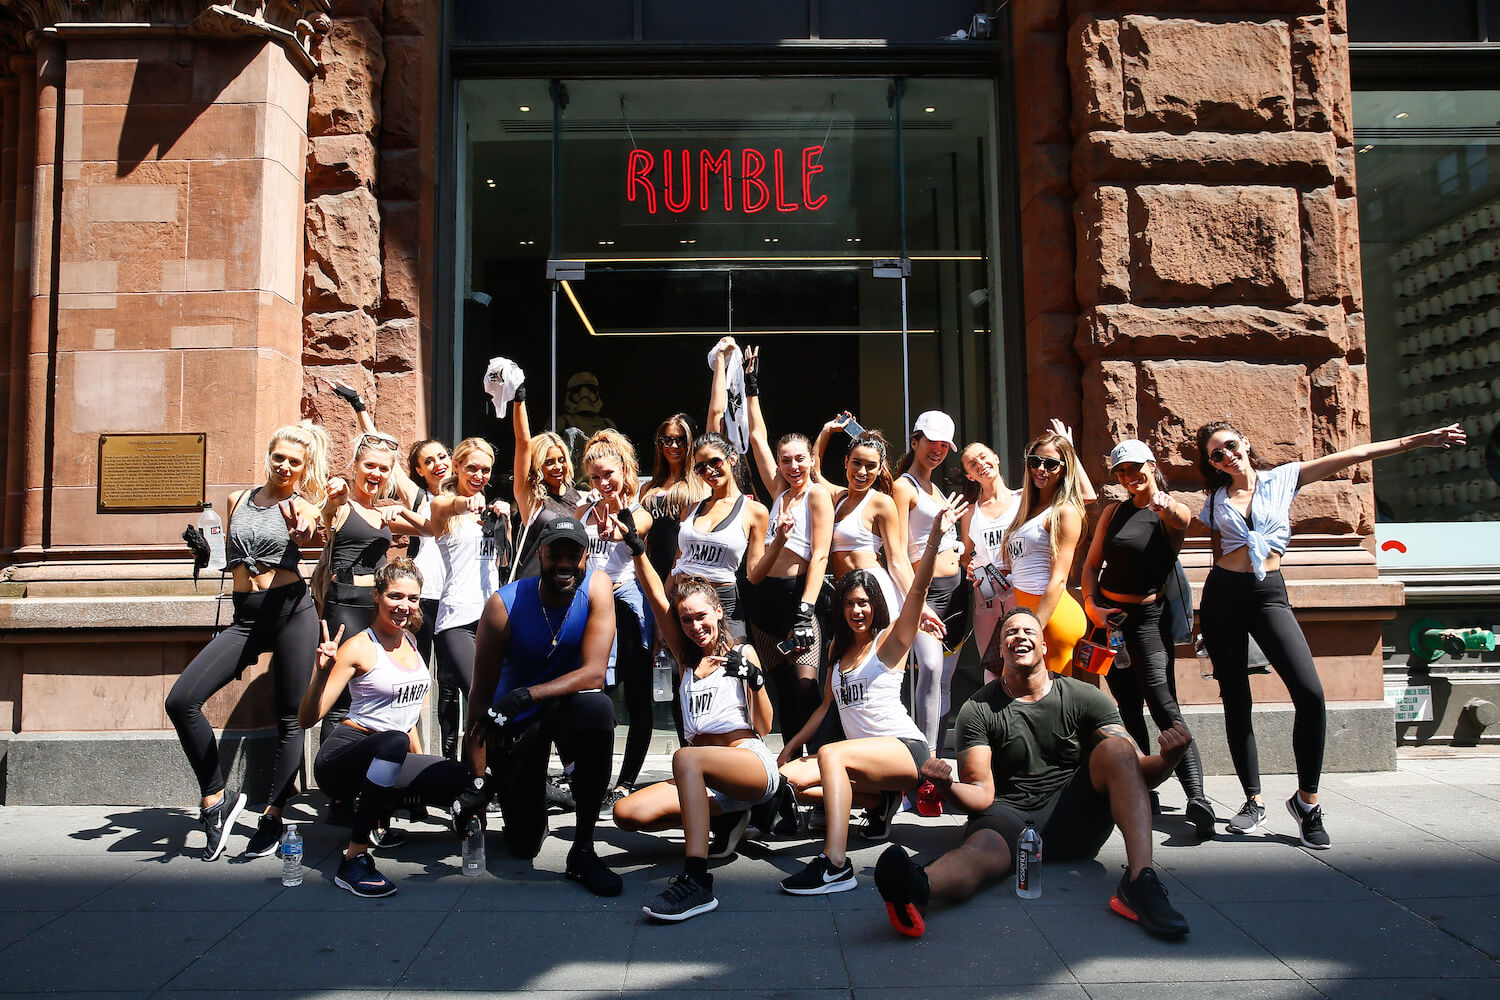 Group posing in front of a Rumble building